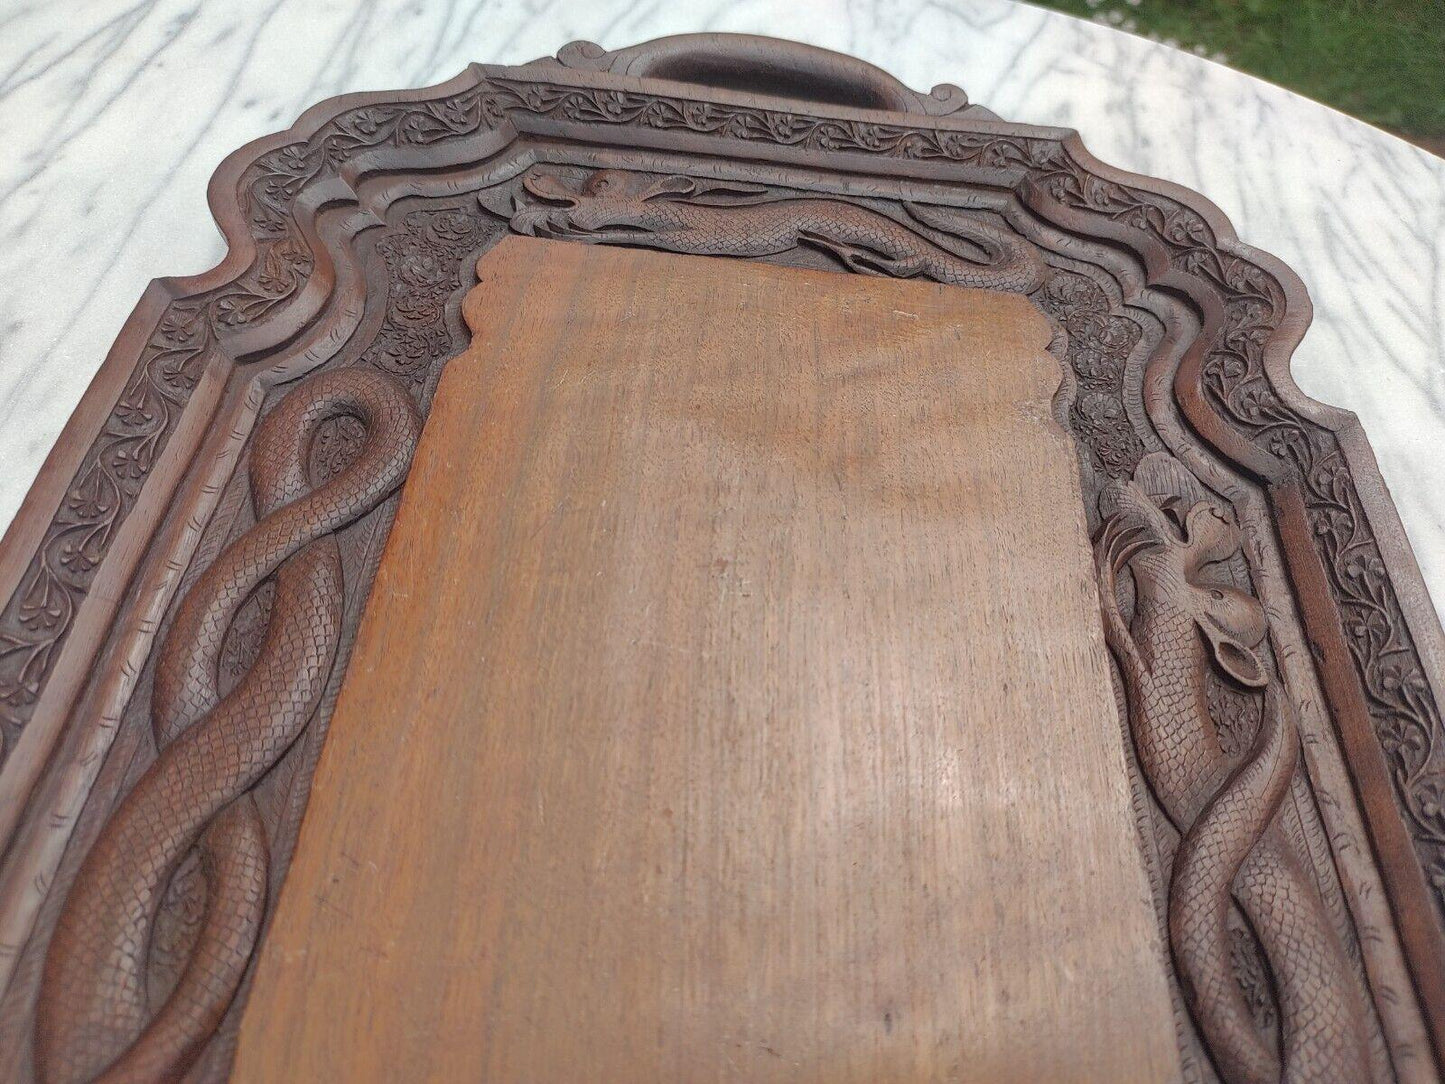 Antique c.1900 Anglo Indian Carved Wooden Dragon & Foliate Serving Tray - 59 cm - Tommy's Treasure